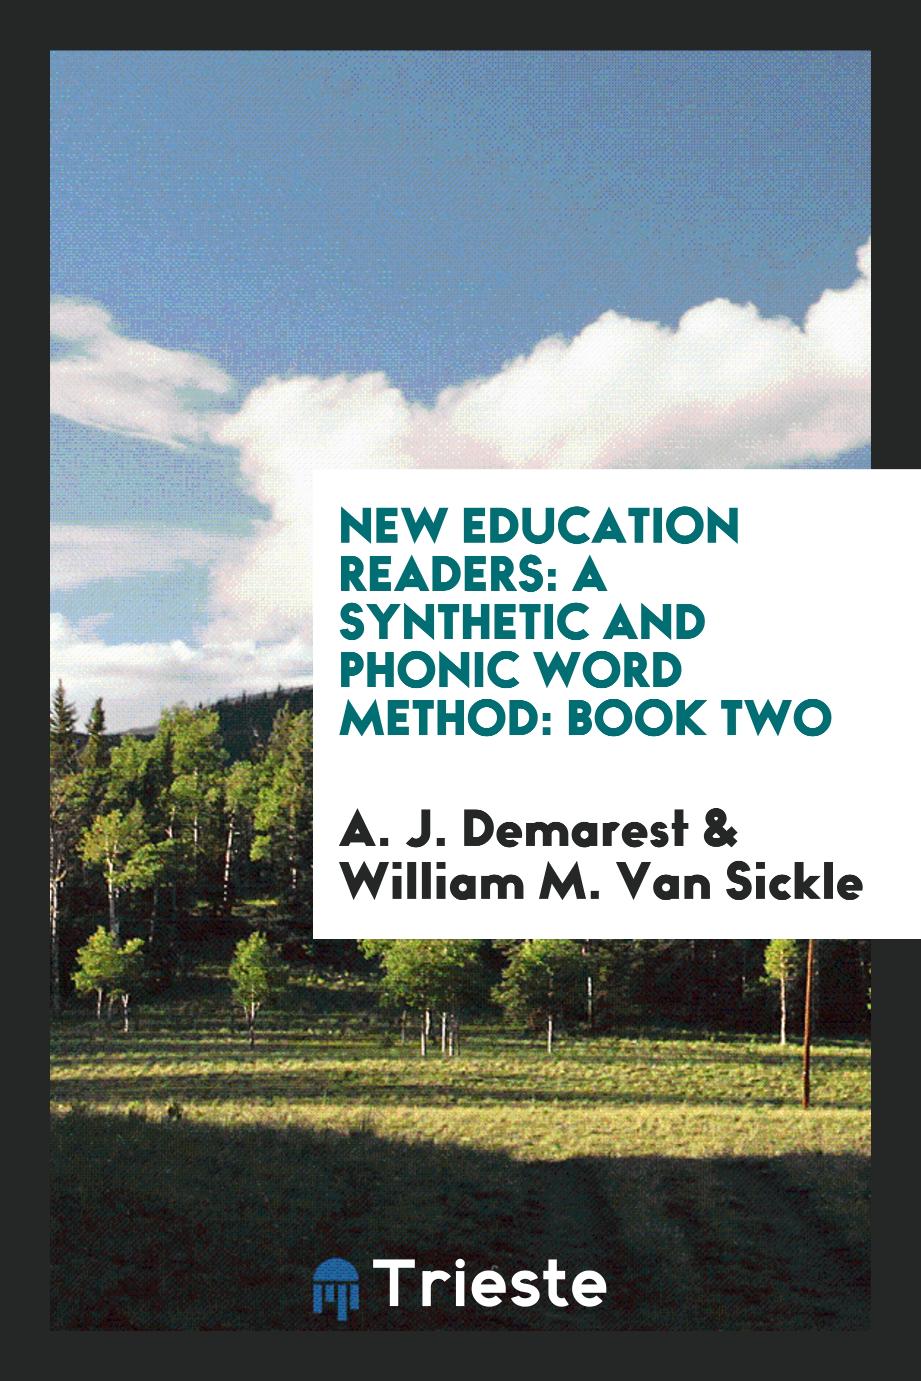 New Education Readers: A Synthetic and Phonic Word Method: Book Two